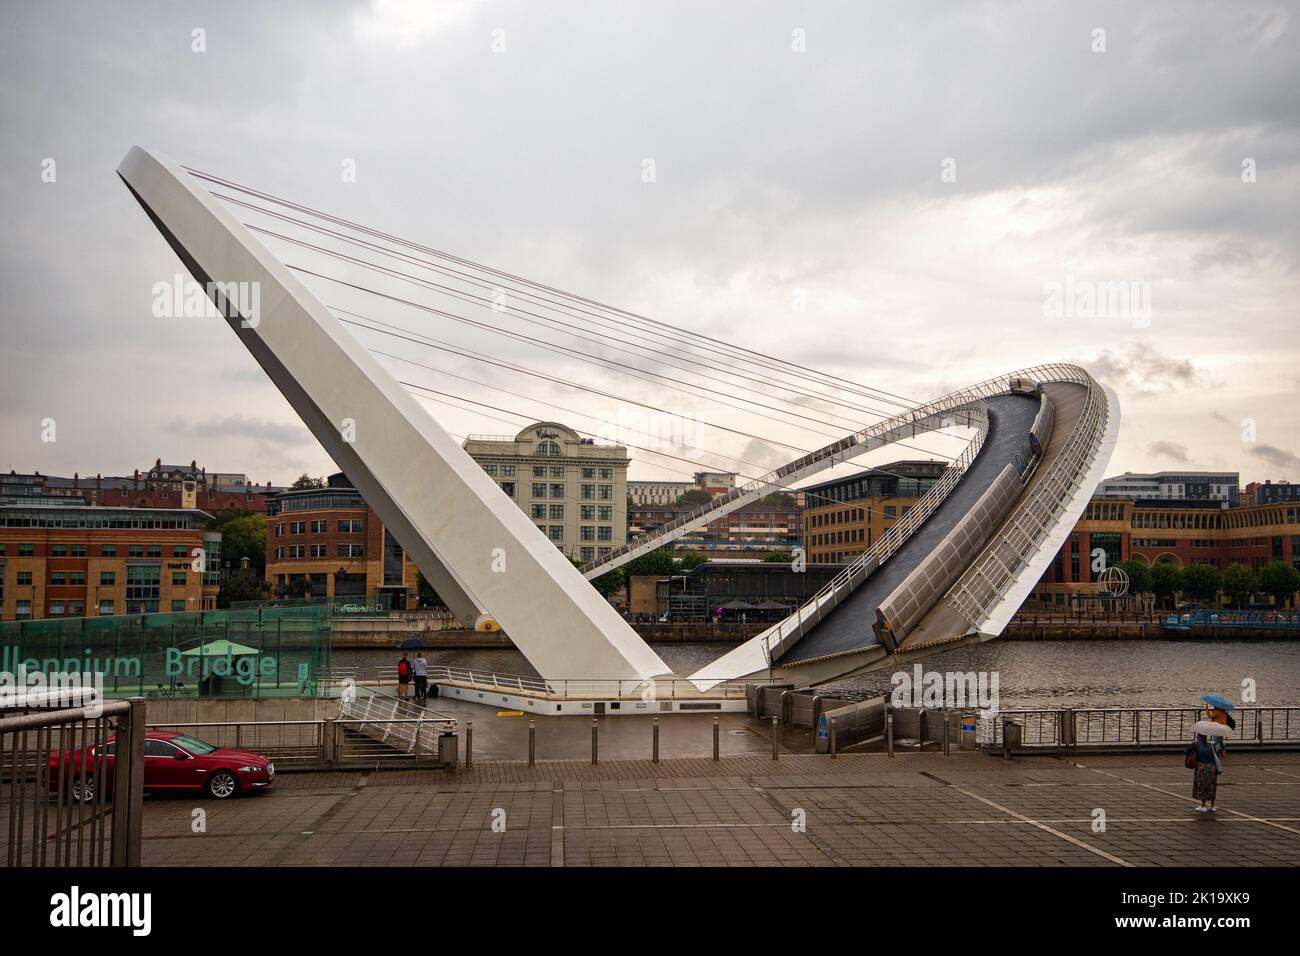 The Gateshead Millennium Bridge opening on a wet day, looking towards the quayside from the Gateshead river bank Stock Photo